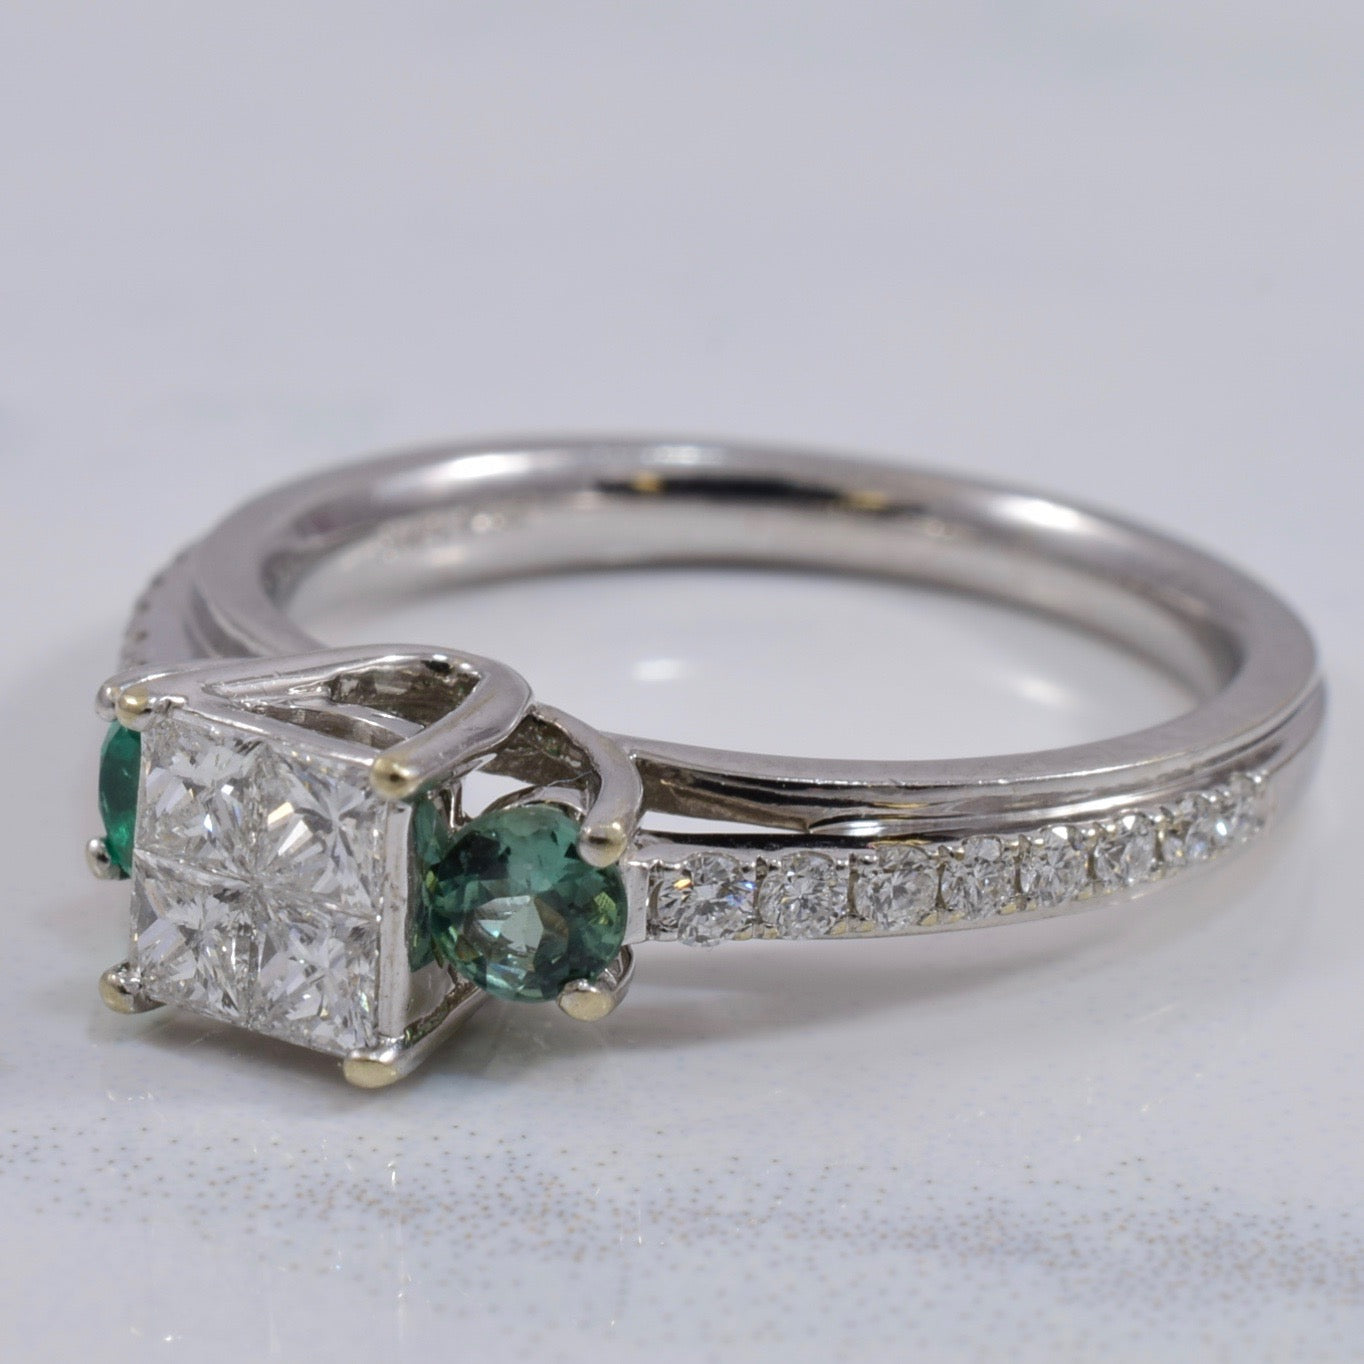 Diamond Engagement Ring with Accent Emerald and Chrysoberyl | 0.47 ctw SZ 6.25 |